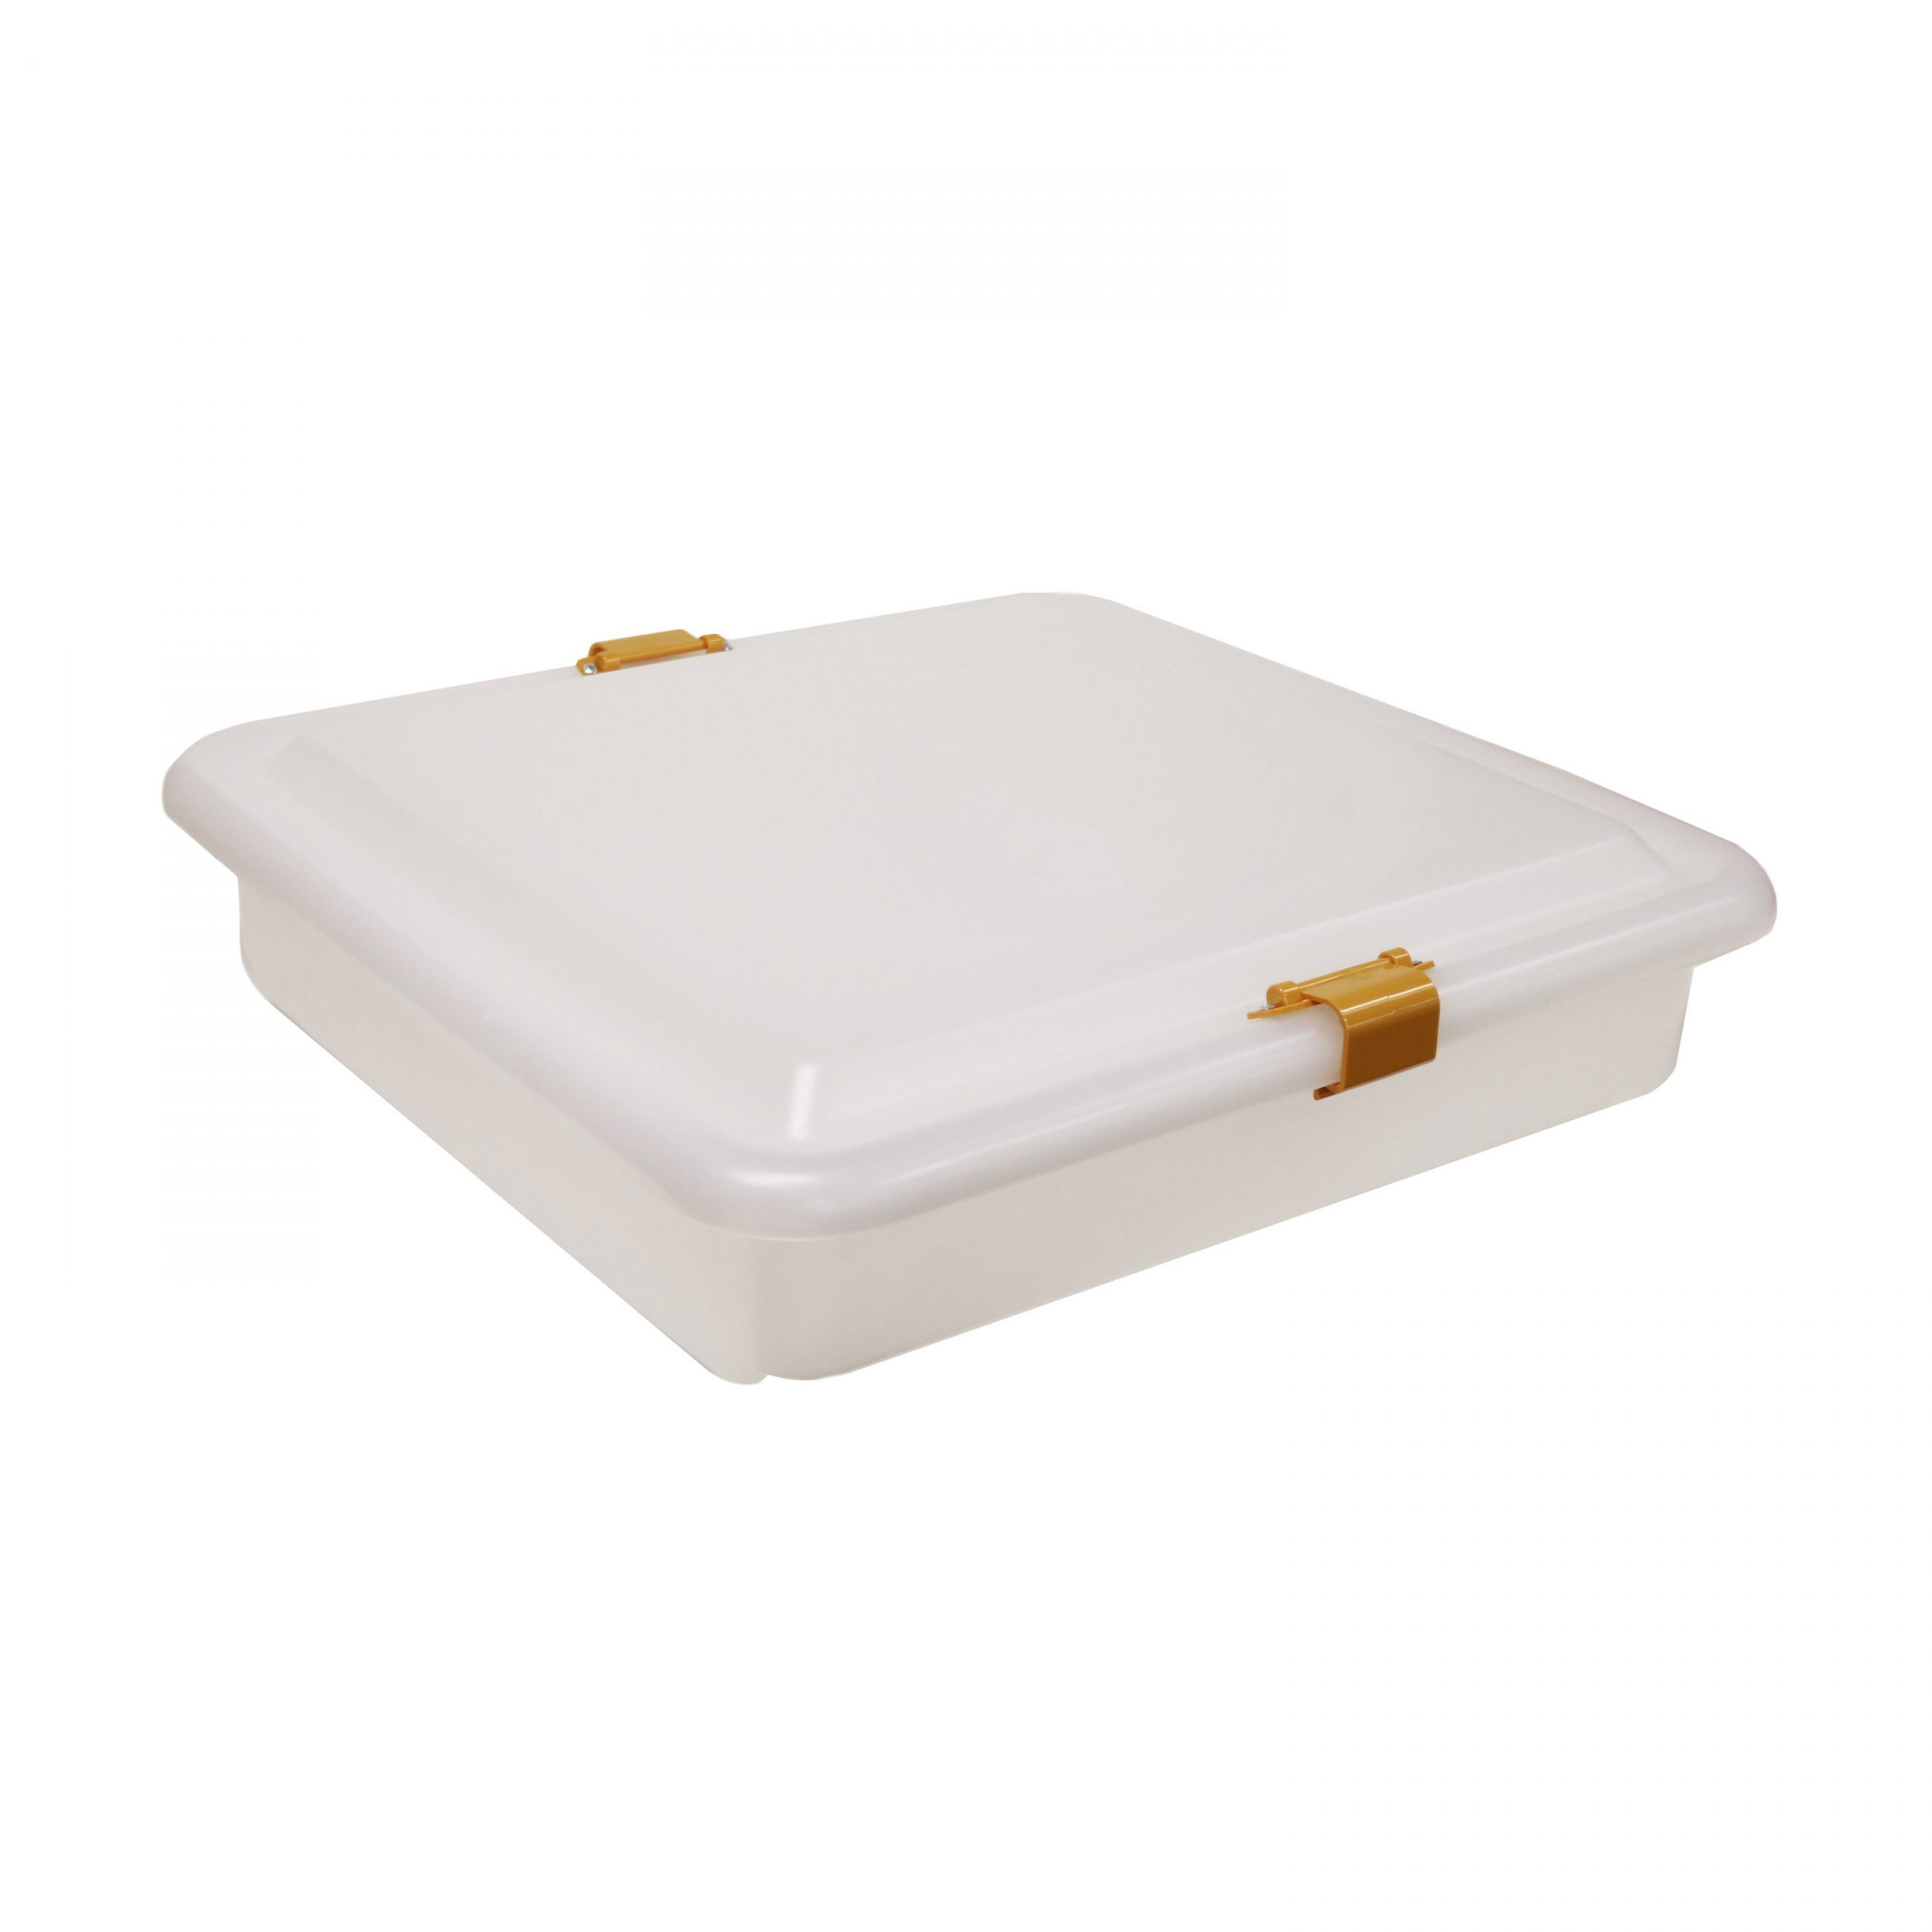 https://www.hmark.com/wp-content/uploads/2020/08/Scope-Transport-Tray-with-Cover-1-scaled.jpg